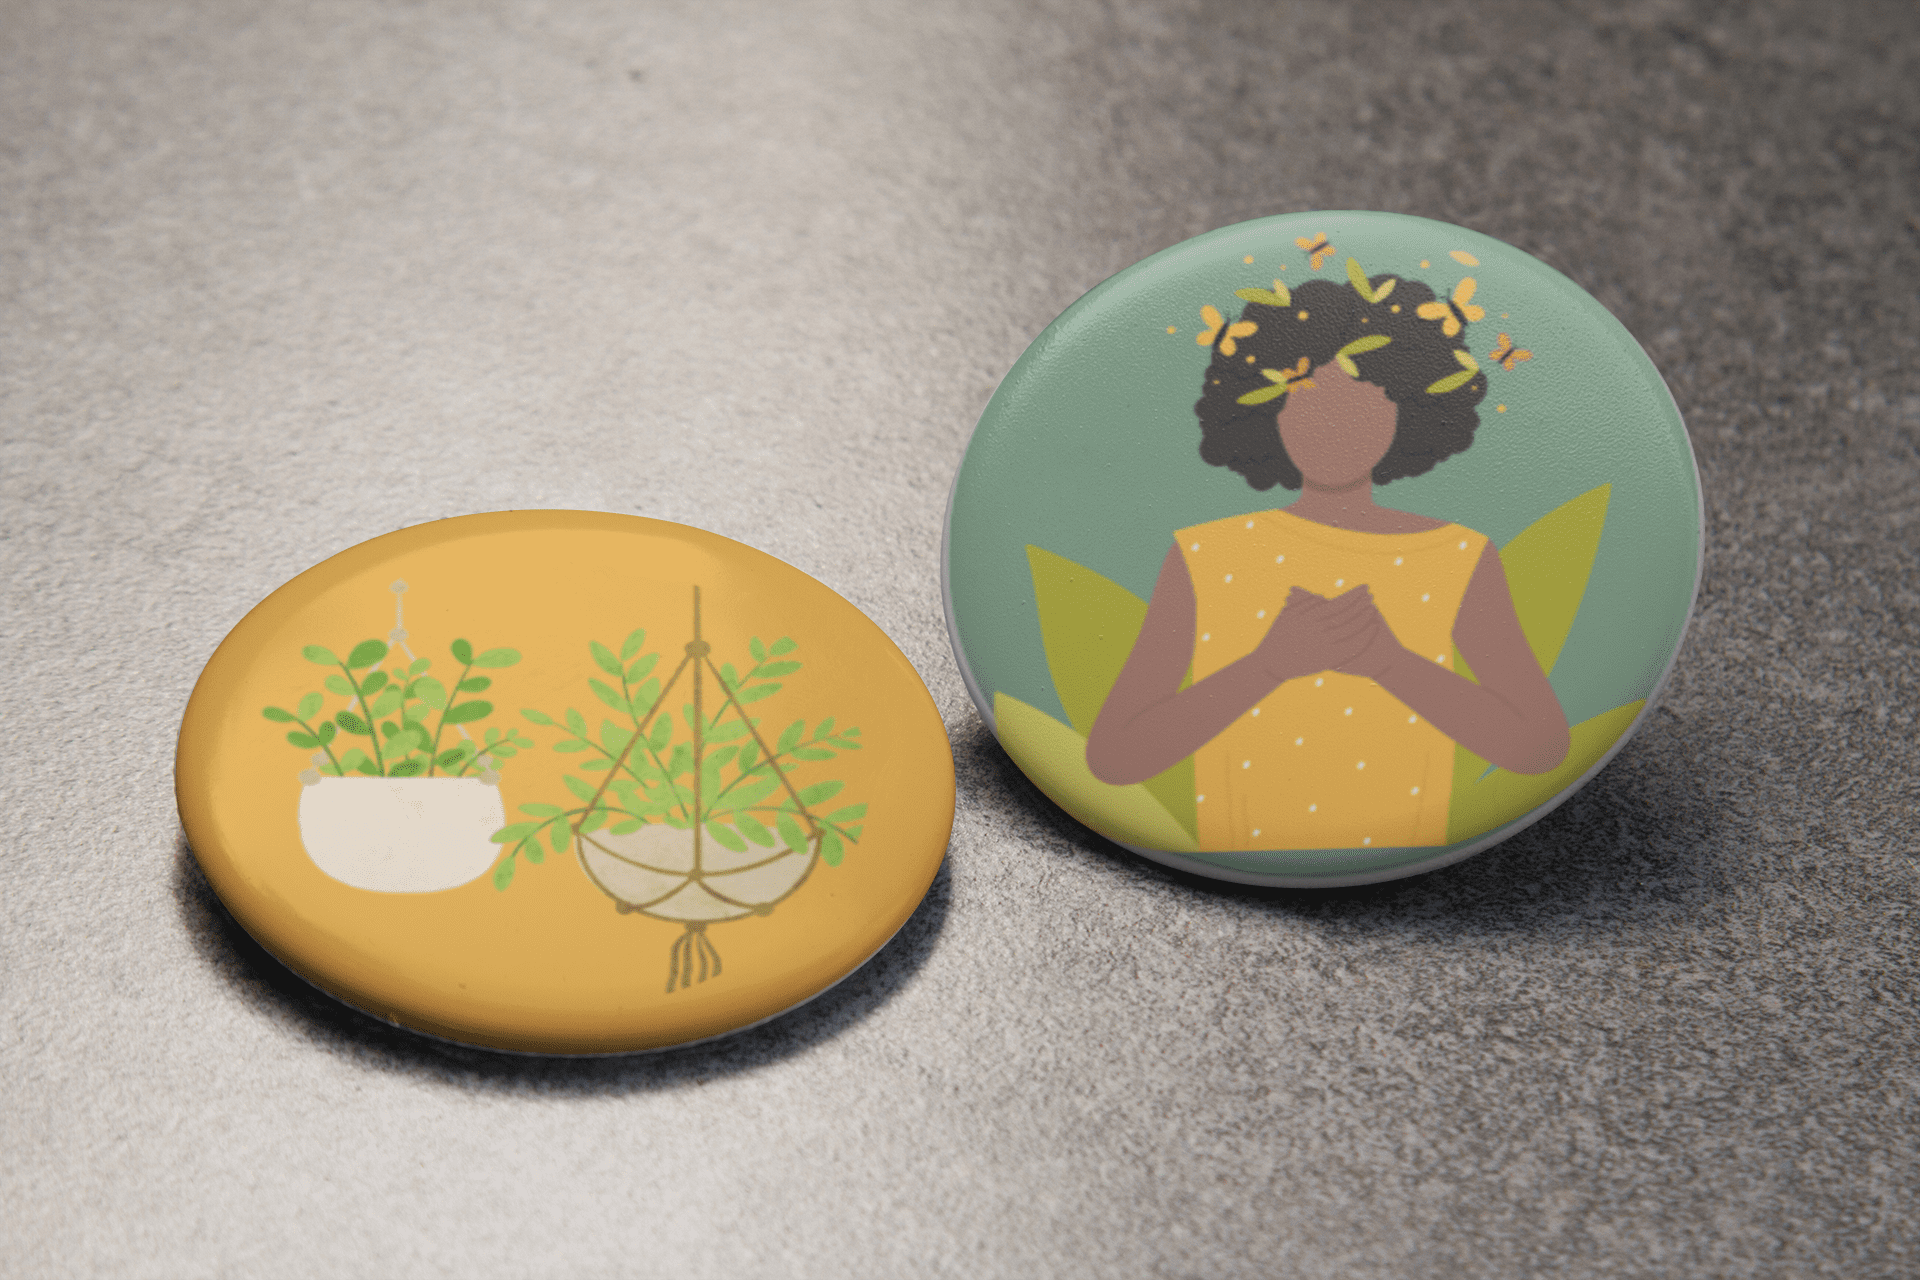 Two button badges featuring an image of a plant mom and a plant, available at Safi Marketplace.